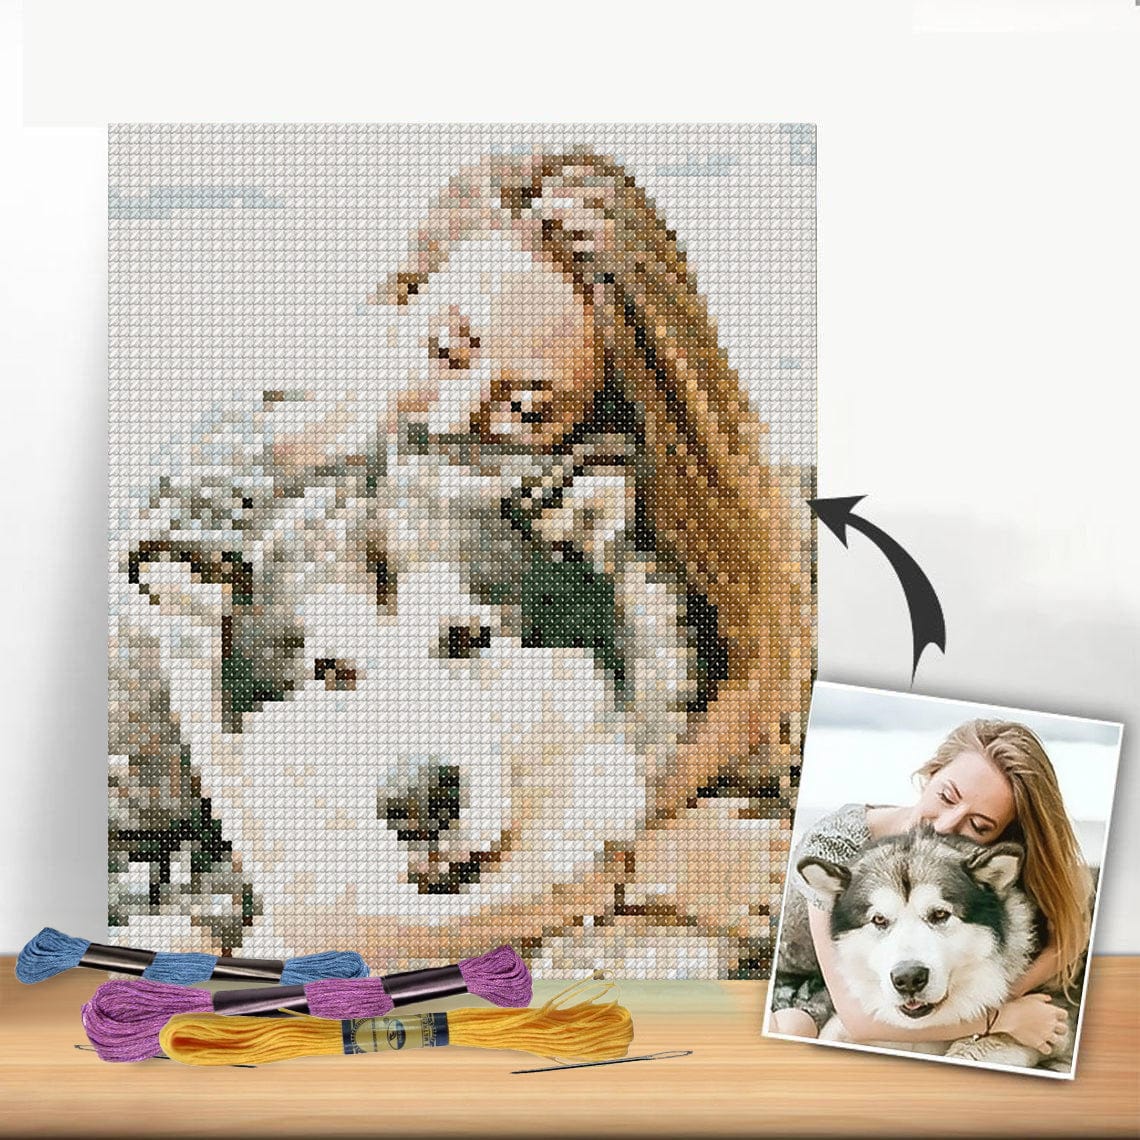 Cross Stitch | Walrus - Person And Dog Inside Tent In Woods - Cross Stitched